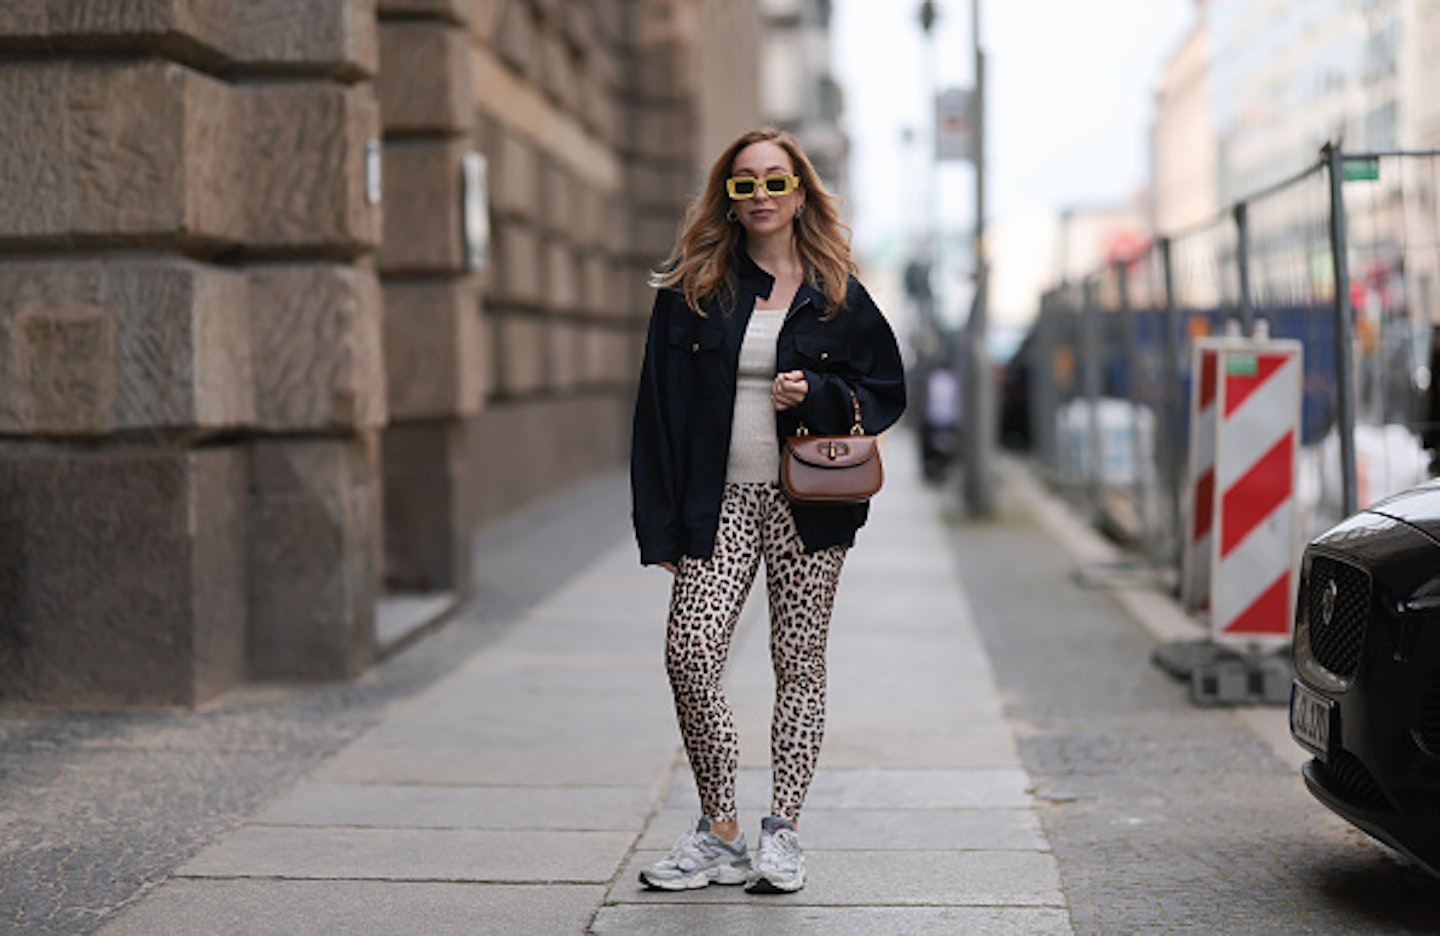 How to Wear Leopard Print Leggings – Just Posted  Outfits with leggings,  Leopard print leggings outfit, Animal print leggings outfit